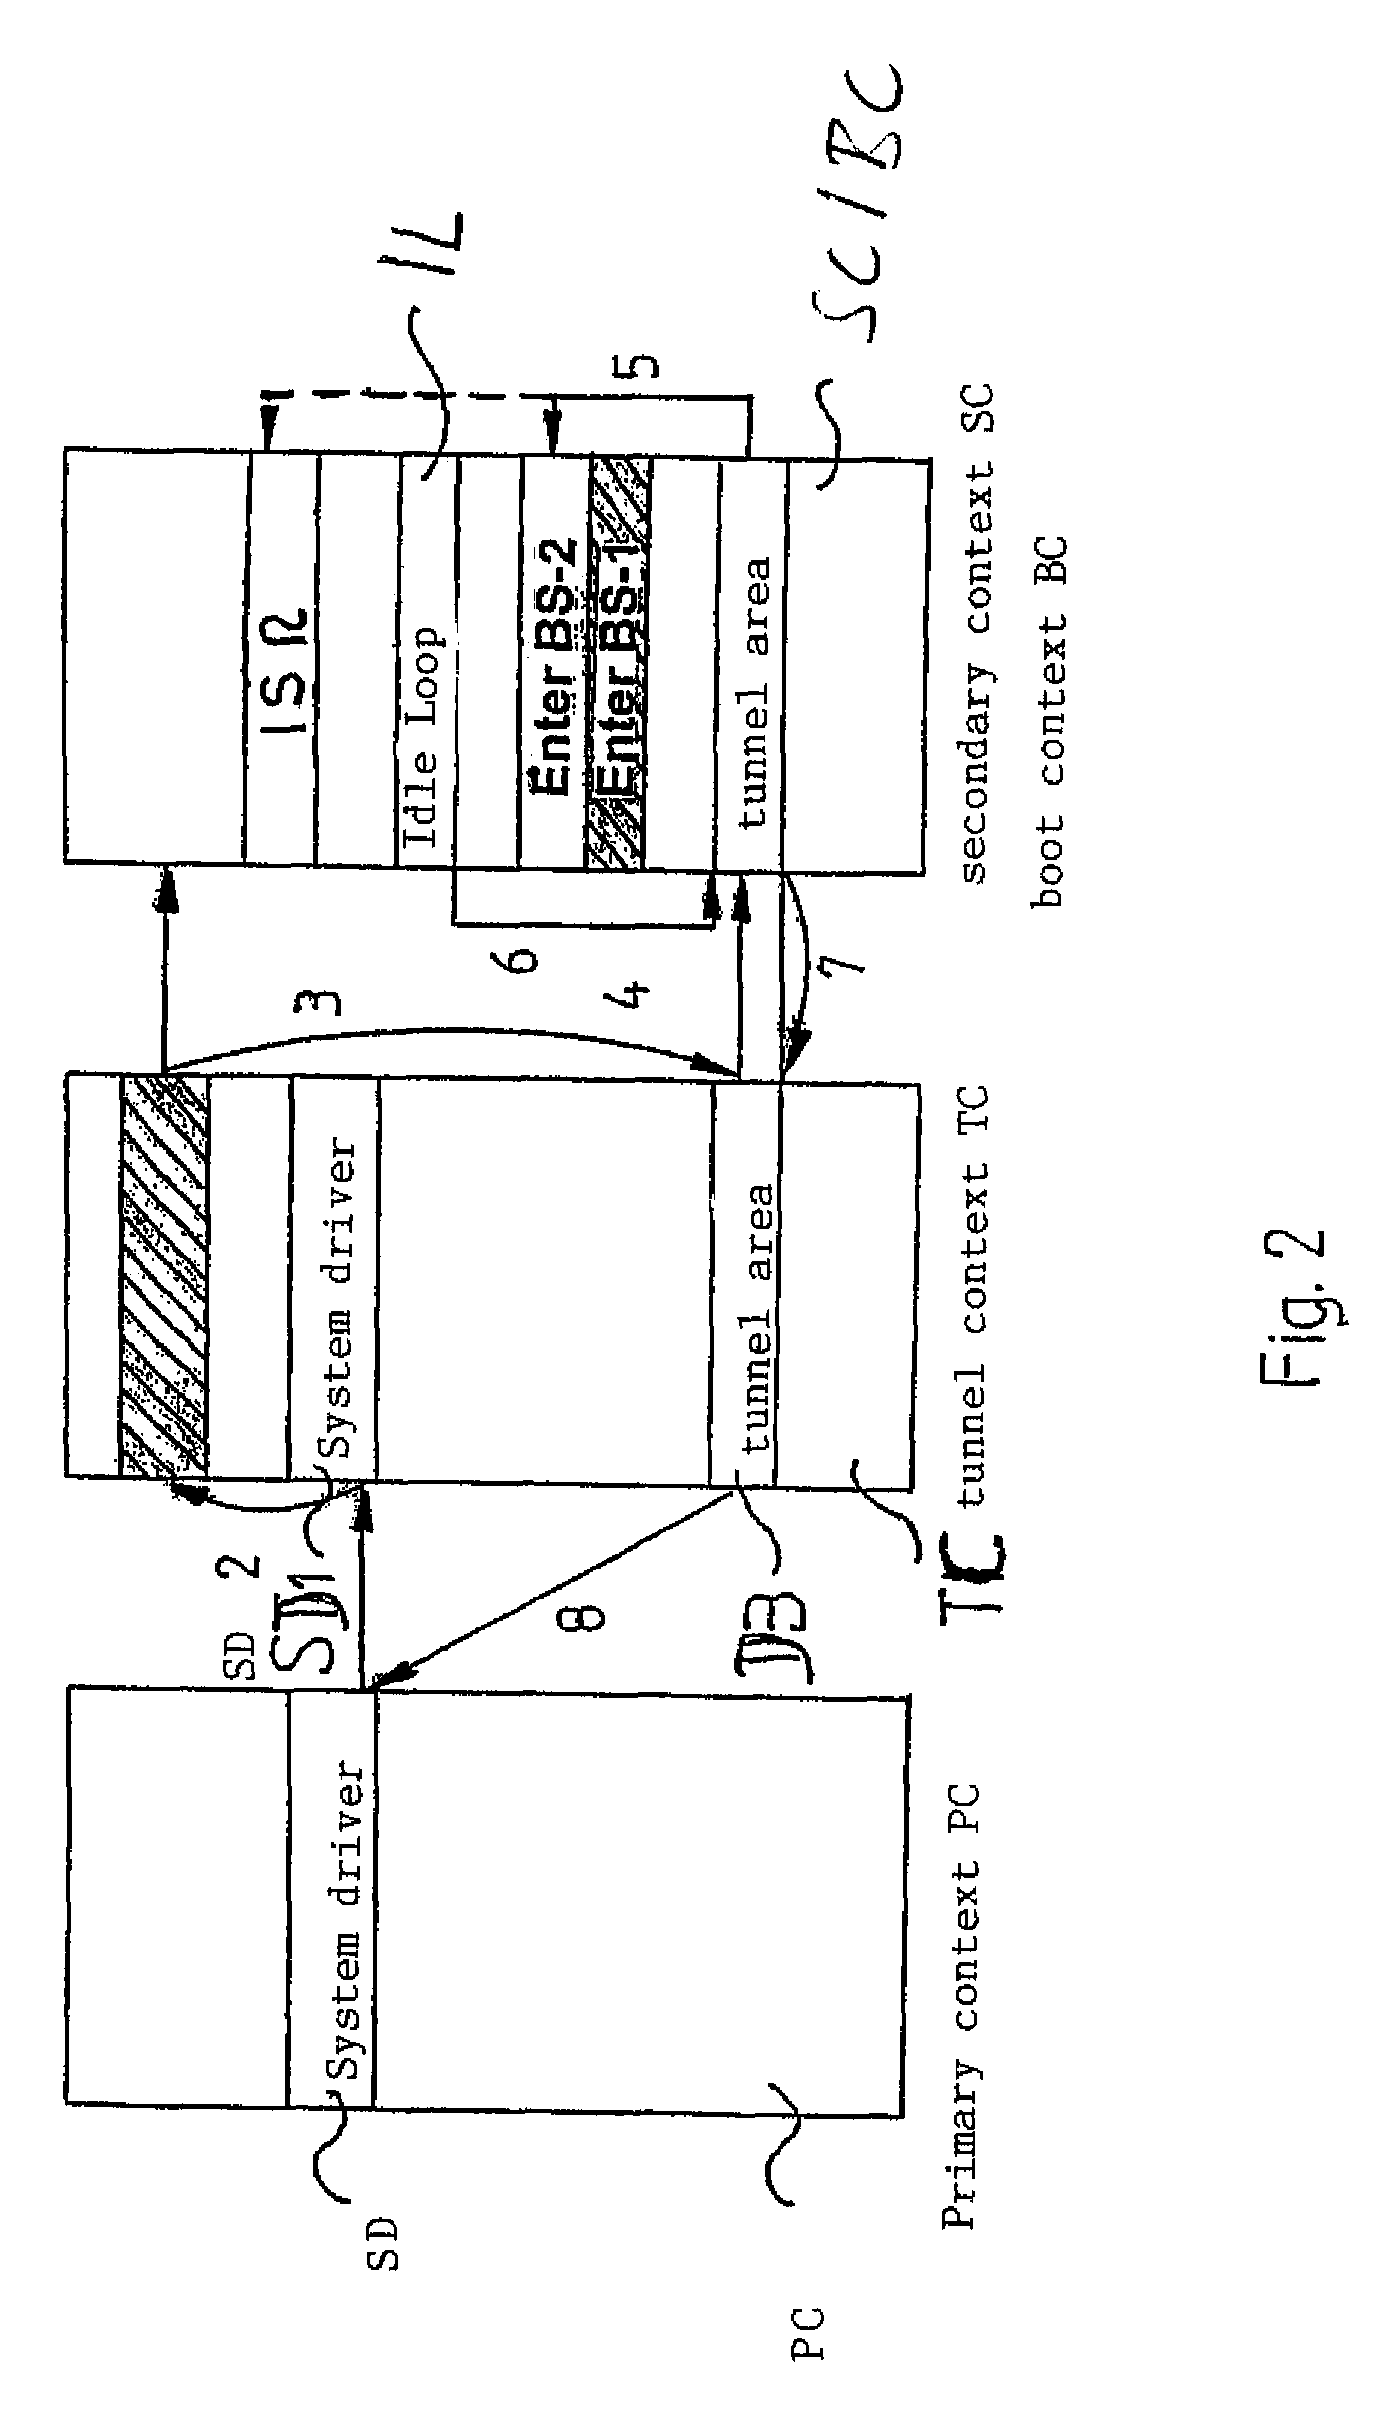 Method and device for operating a secondary operating system auxiliary to a primary operating system